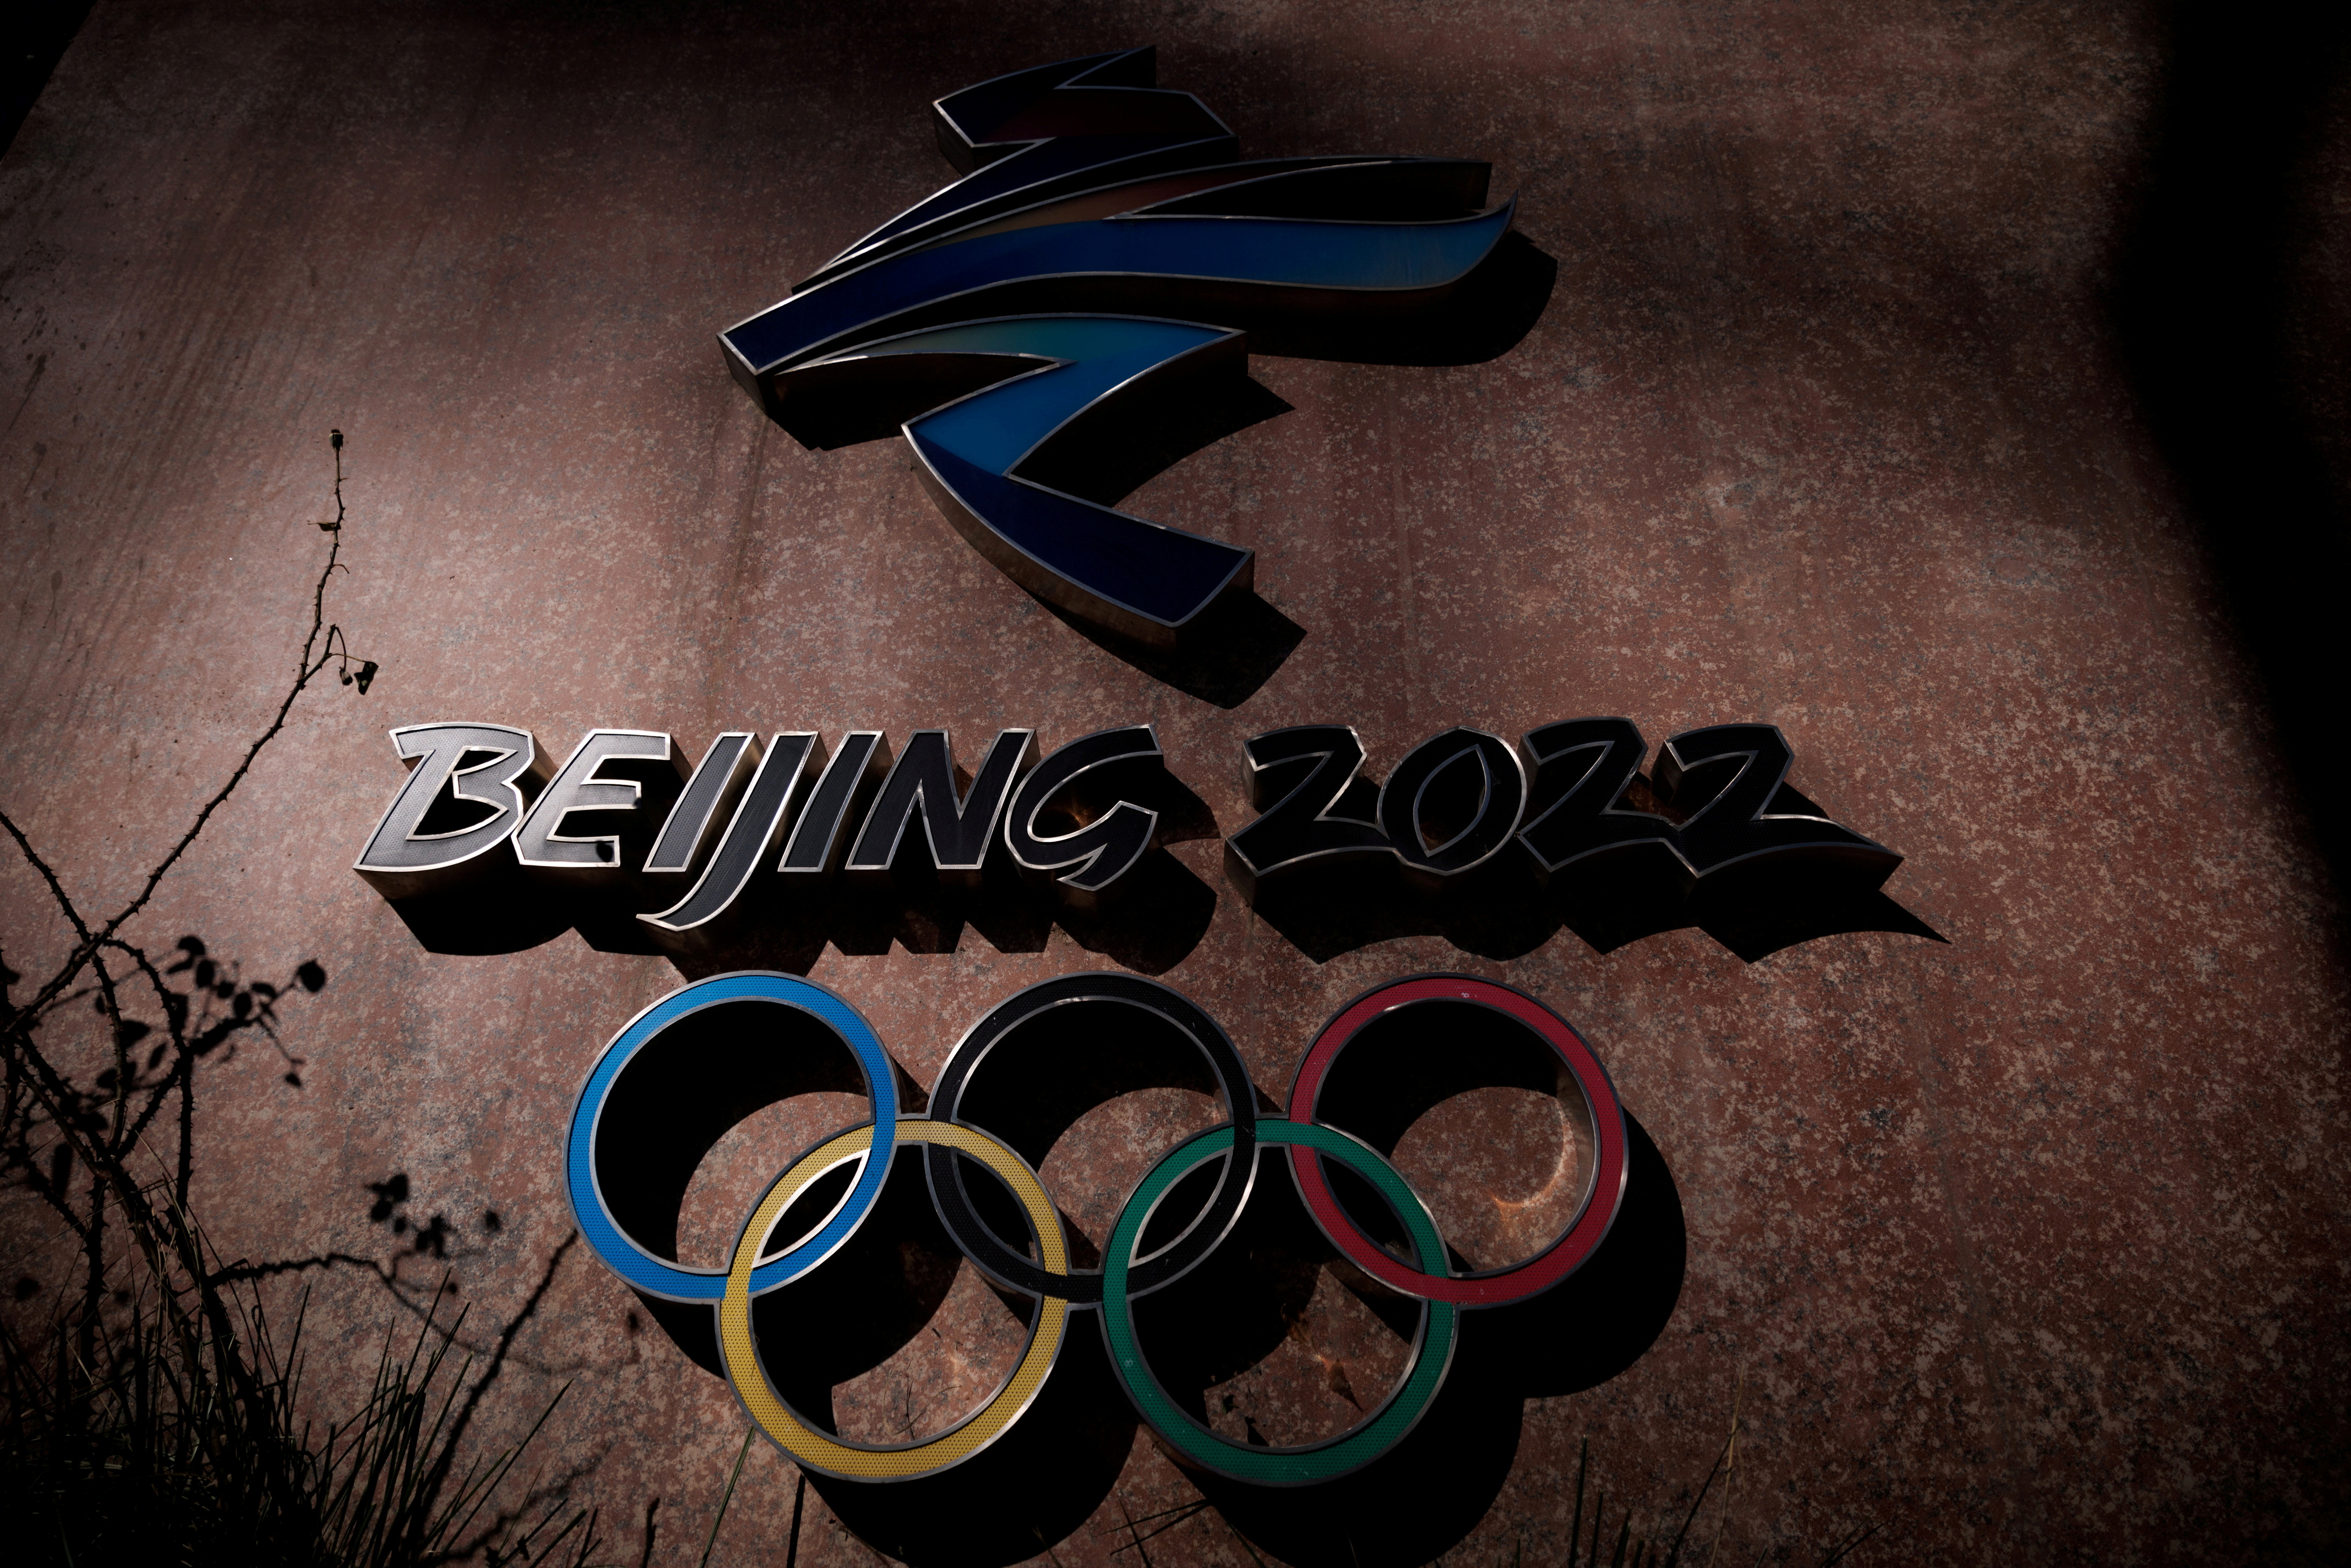 FILE PHOTO: The Beijing 2022 logo is seen outside the headquarters of the Beijing Organising Committee for the 2022 Olympic and Paralympic Winter Games in Shougang Park in Beijing